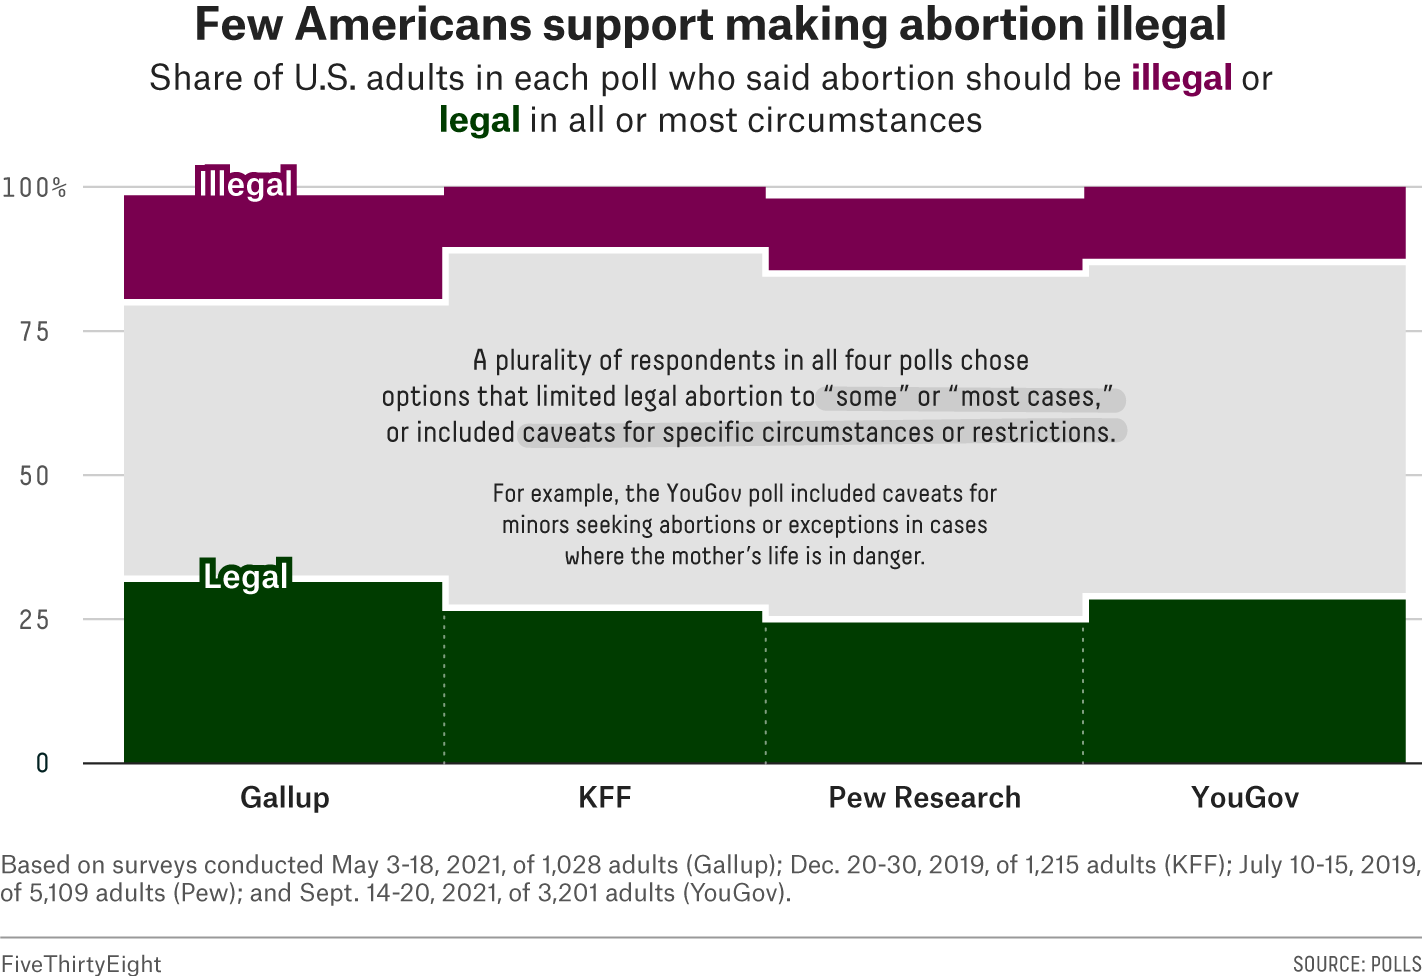 Stacked bar chart of the share of U.S. adults who said abortion should be illegal or legal in all or most circumstances in four different polls, showing that few Americans support making abortion fully illegal and that the majority of responds chose options that limited legal abortion to “some” or “most cases," or included caveats for specific circumstances or restrictions.